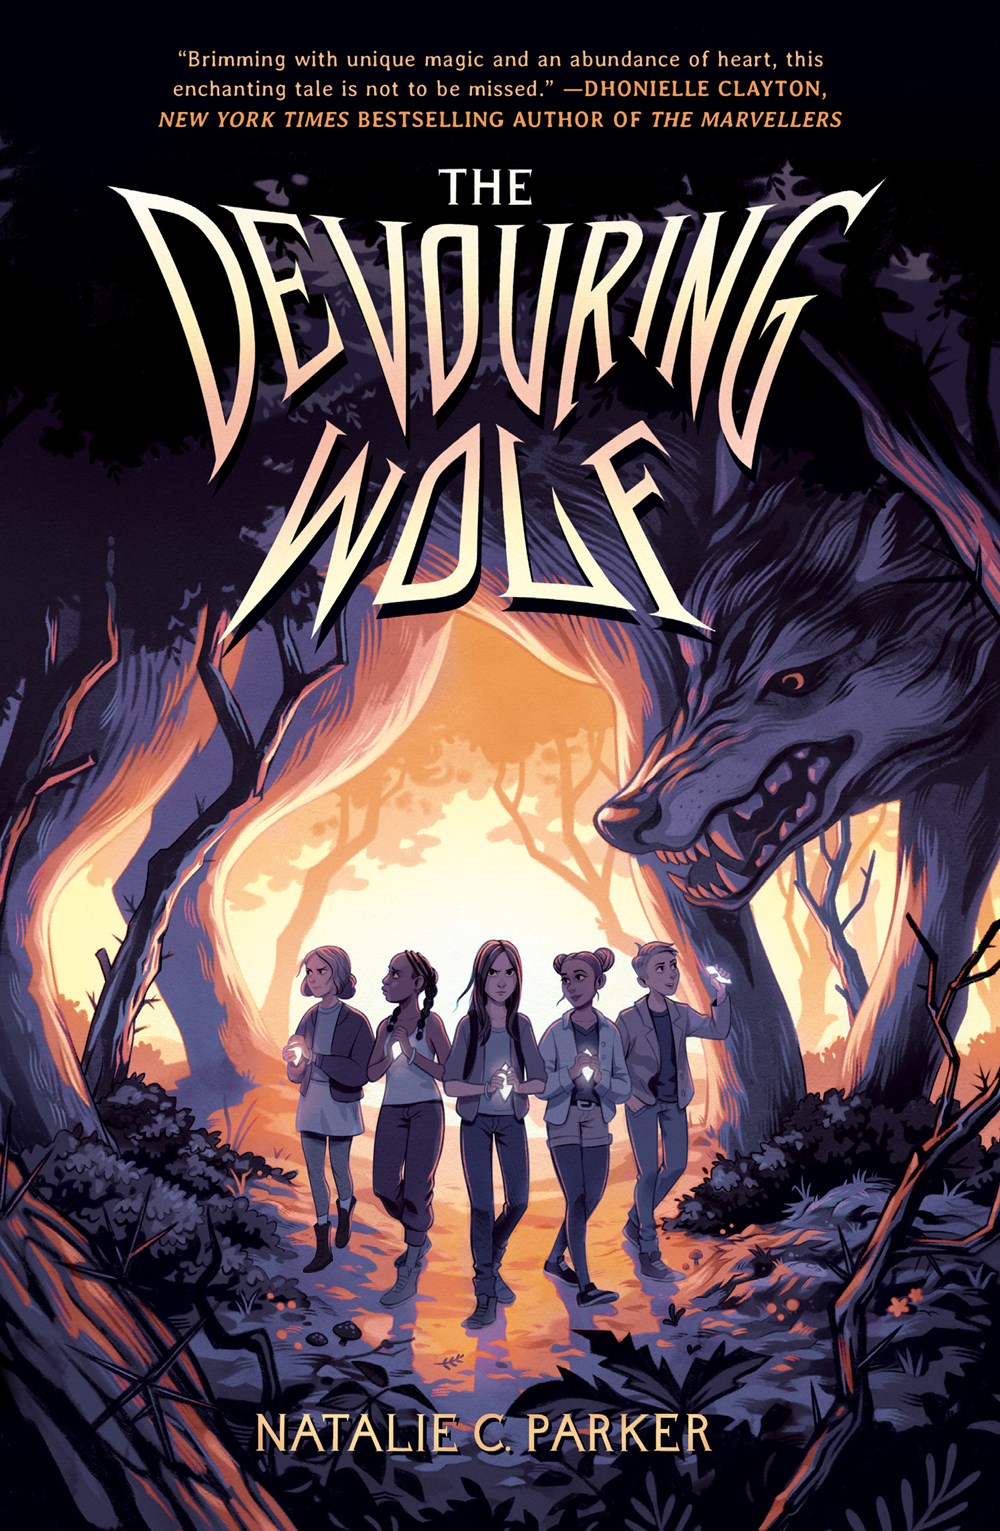 The Devouring Wolf - Signed Copy